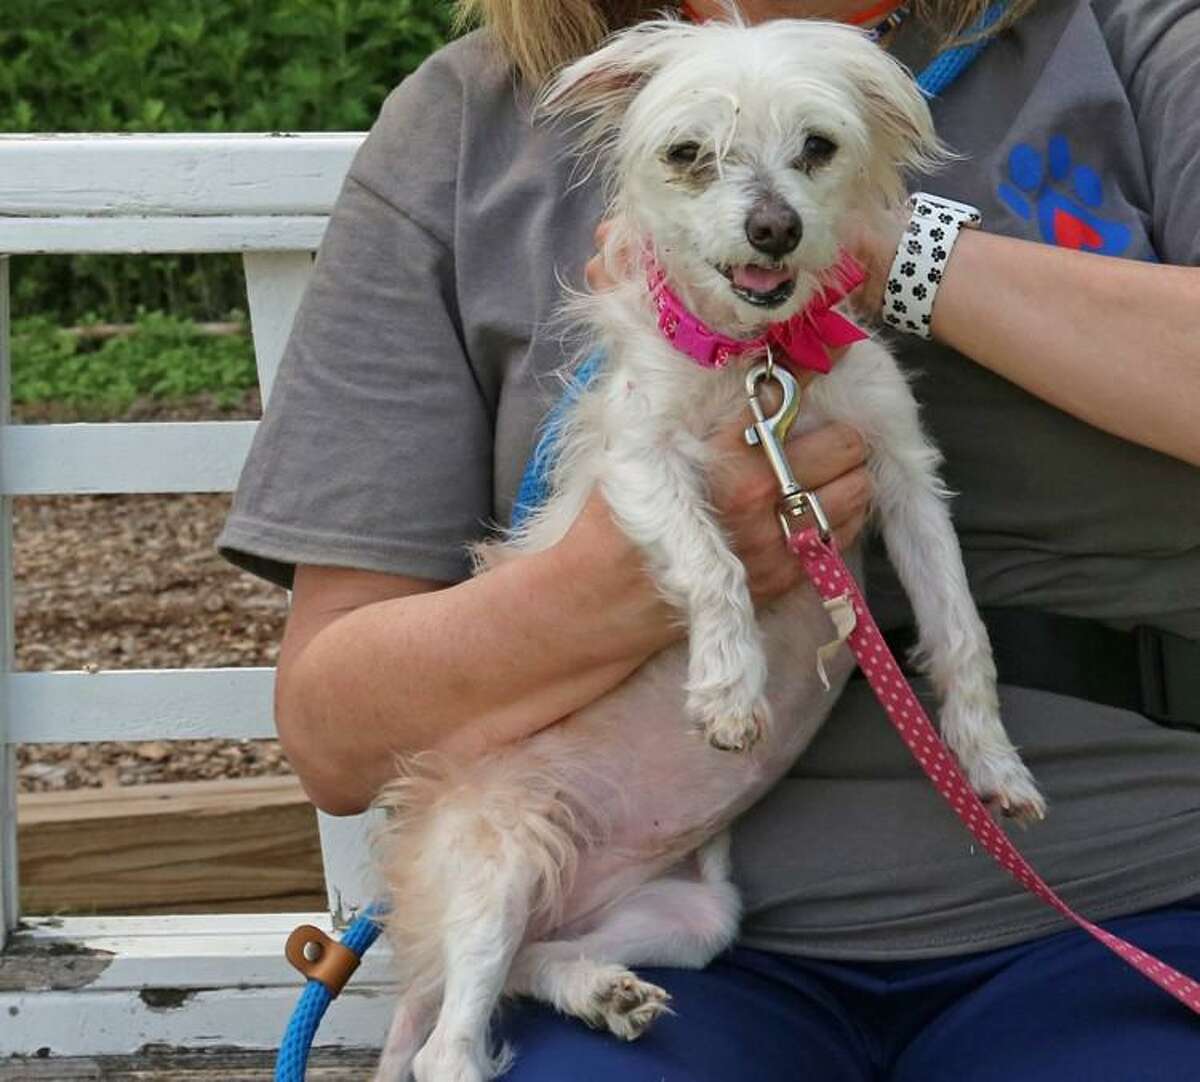 A few months ago, Dolly was found alone outside with matted fur, scabs, infected ears and an overwhelming need for veterinary care. Today, she’s fluffy, pain-free, and feeling loved in a new home.